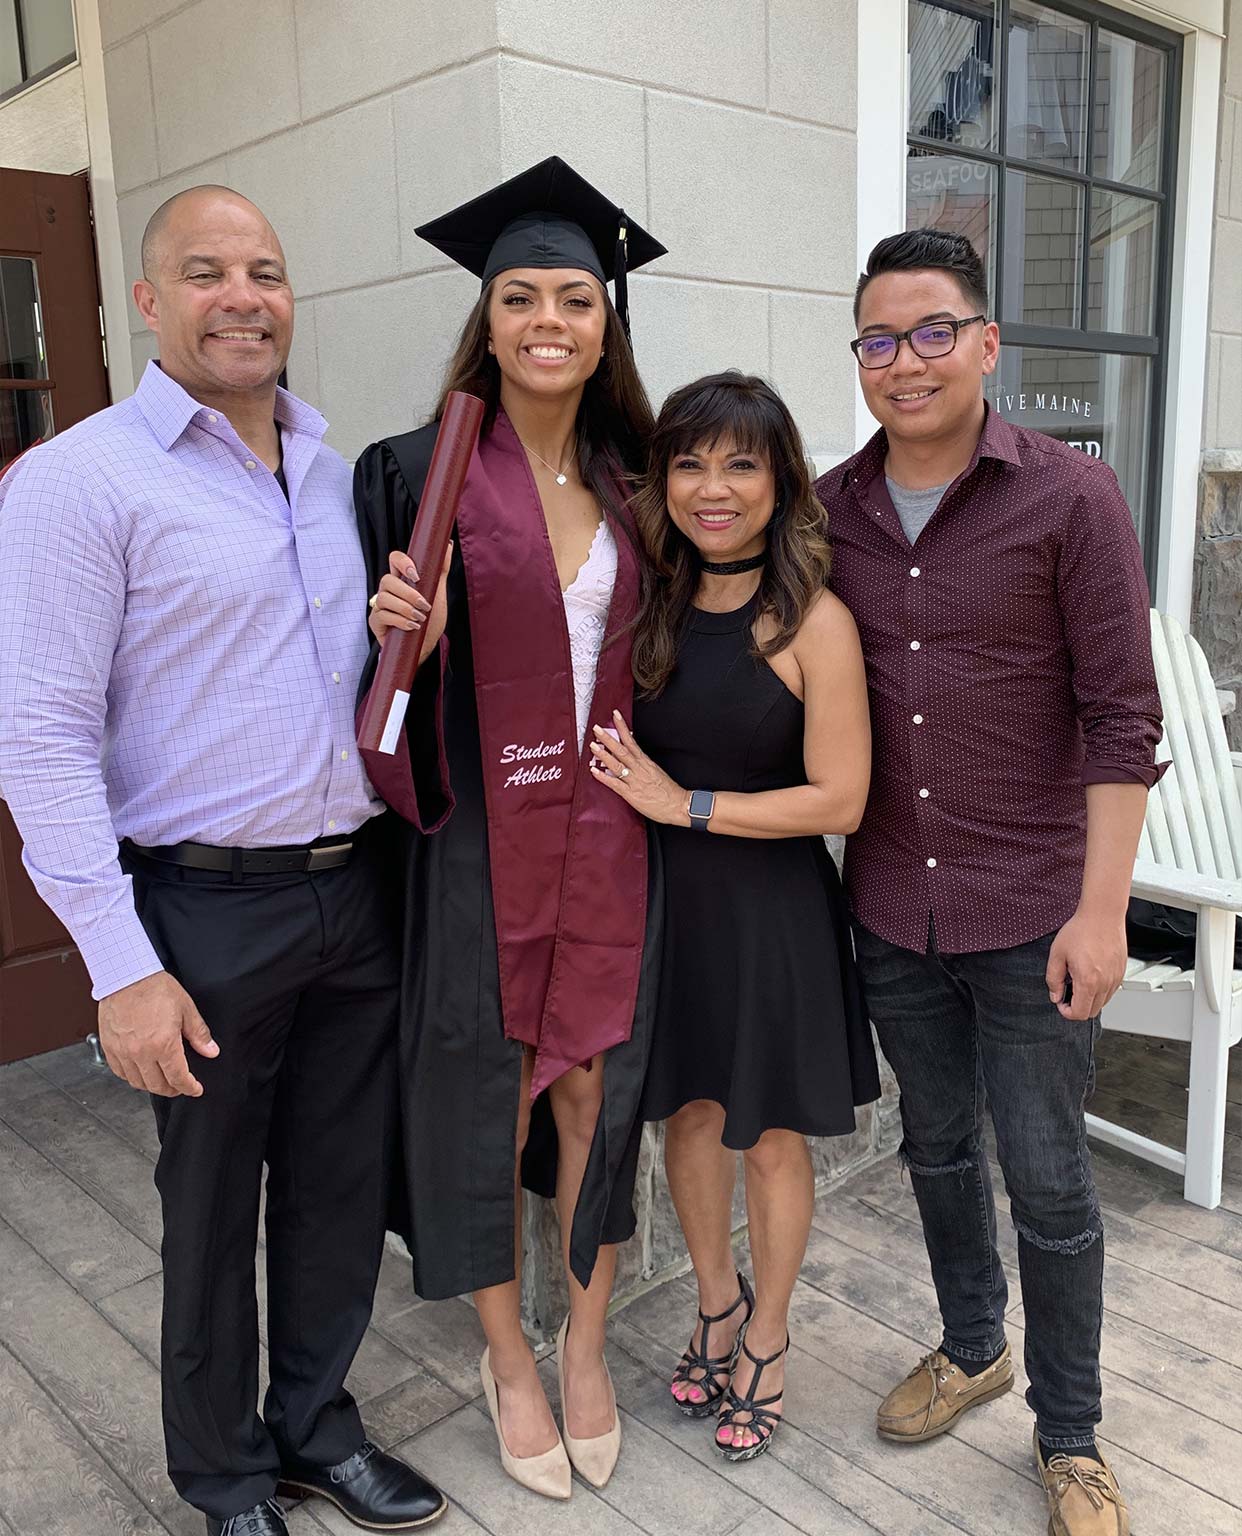 Ally Watt in her graduation gown posing with family